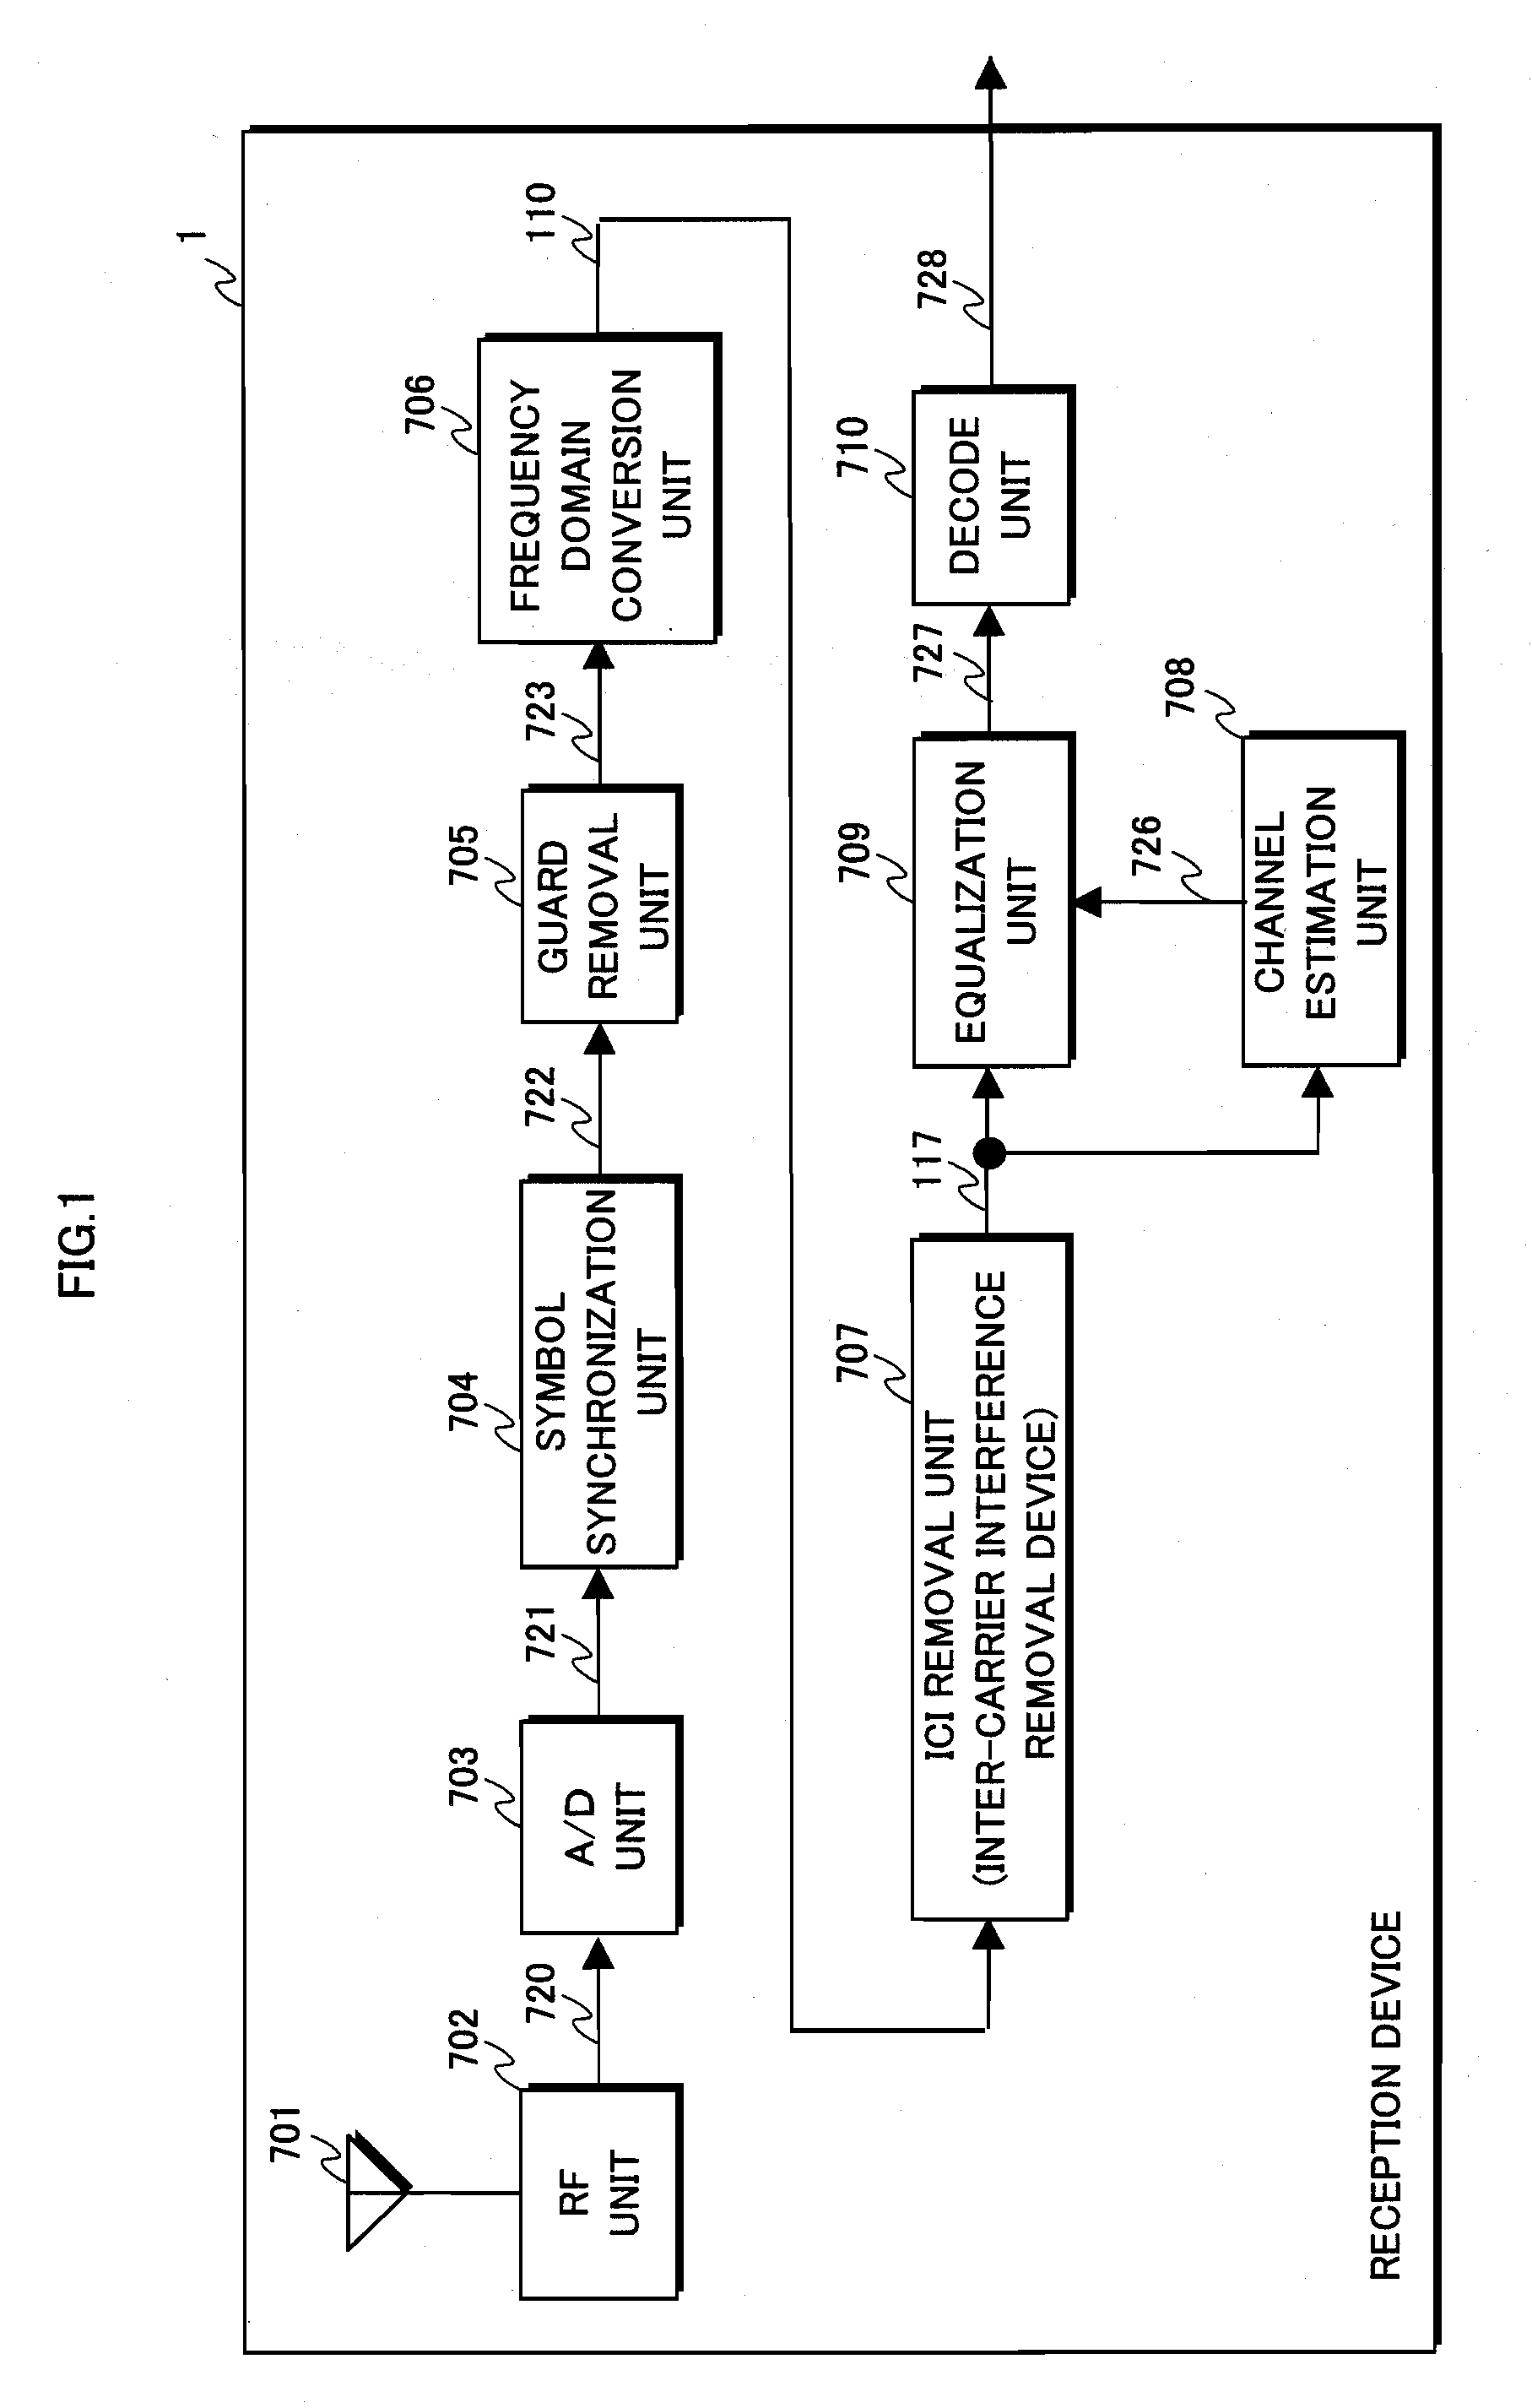 Inter-carrier interference removal device and reception device using the same